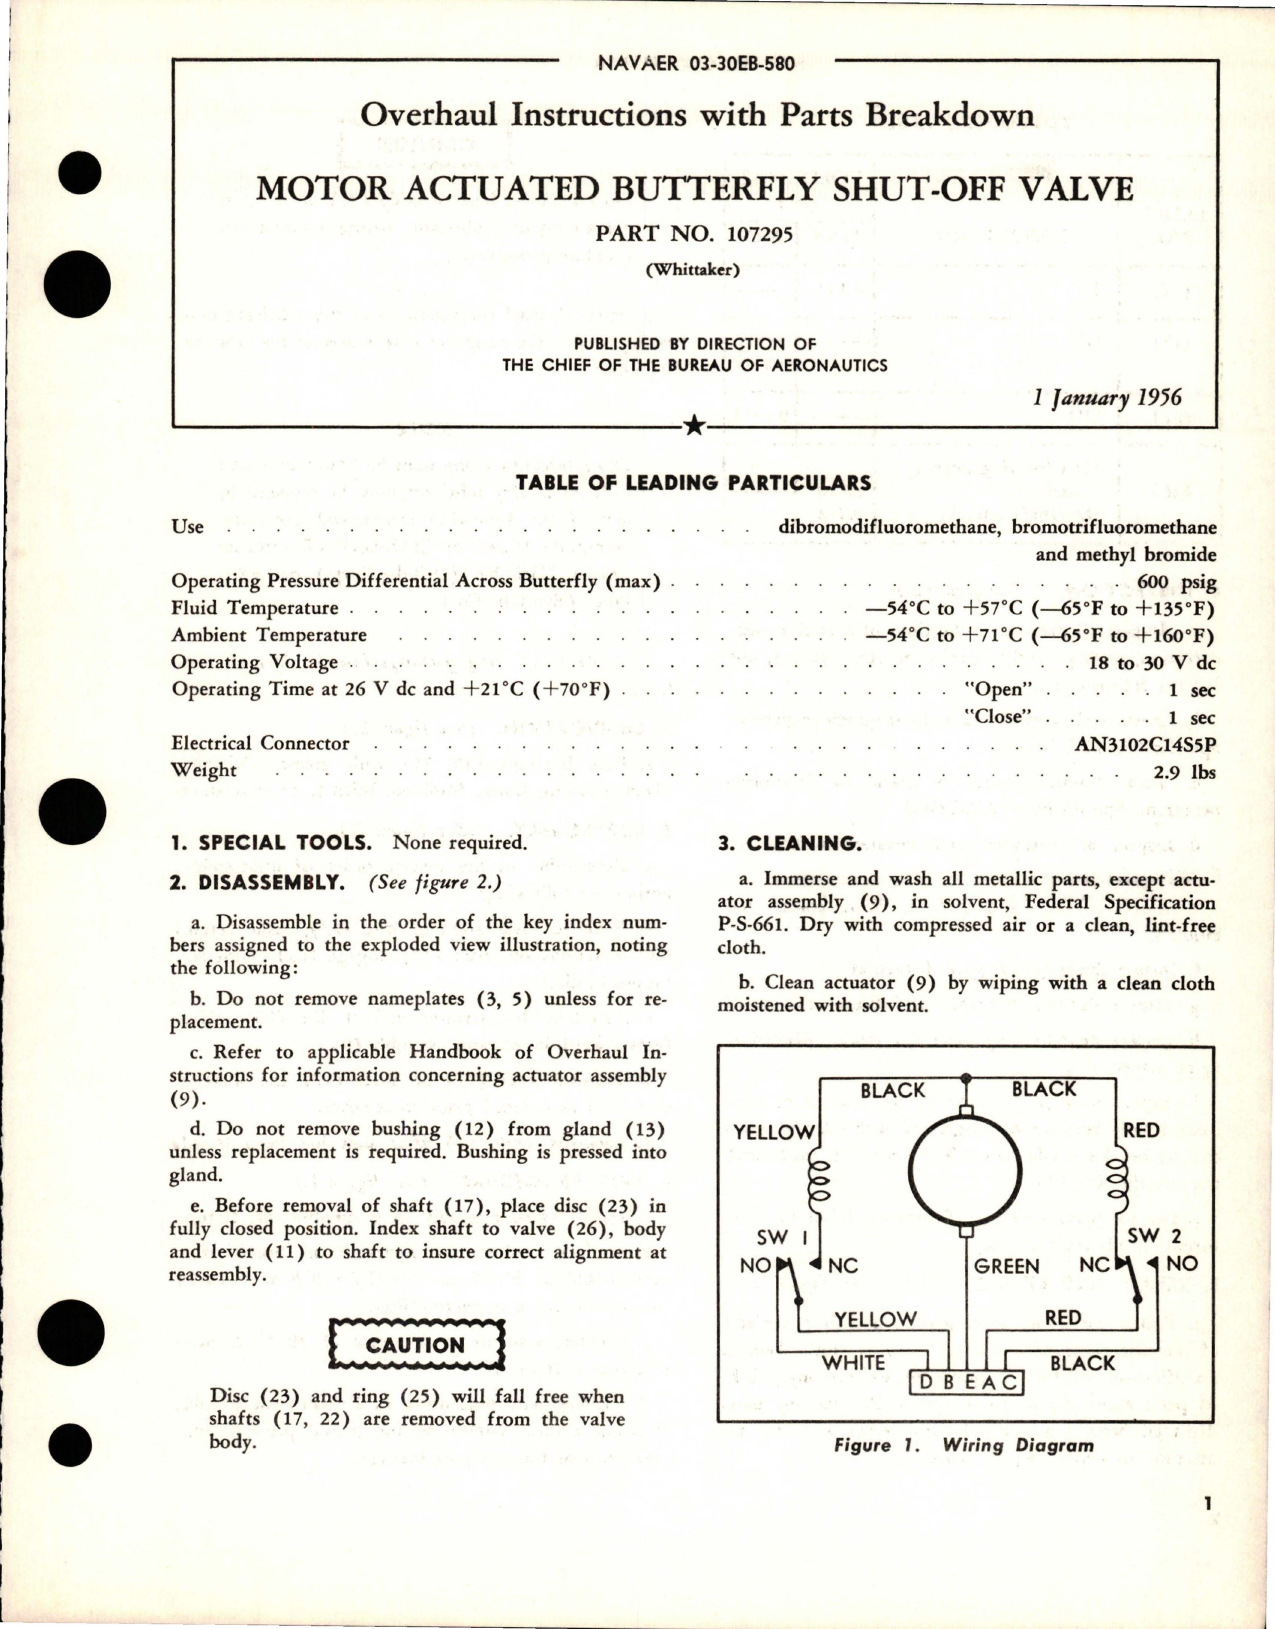 Sample page 1 from AirCorps Library document: Overhaul Instructions with Parts for Motor Actuated Butterfly Shut Off Valve - Part 107295